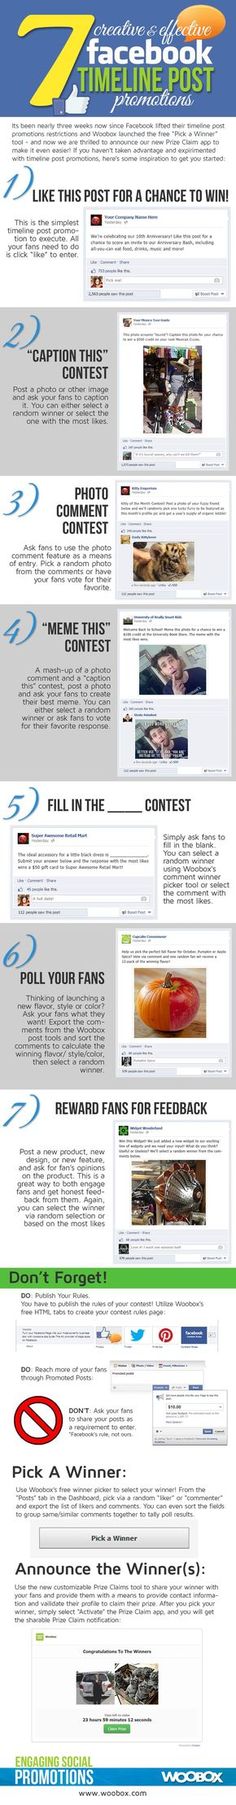 Facebook Promotions Ideas Infographic. Open a #Facebook page for the opening day of the Student Union and post statuses using these effective methods. #socialmedia Organisation, Facebook Business, Social Media Business, Facebook Marketing